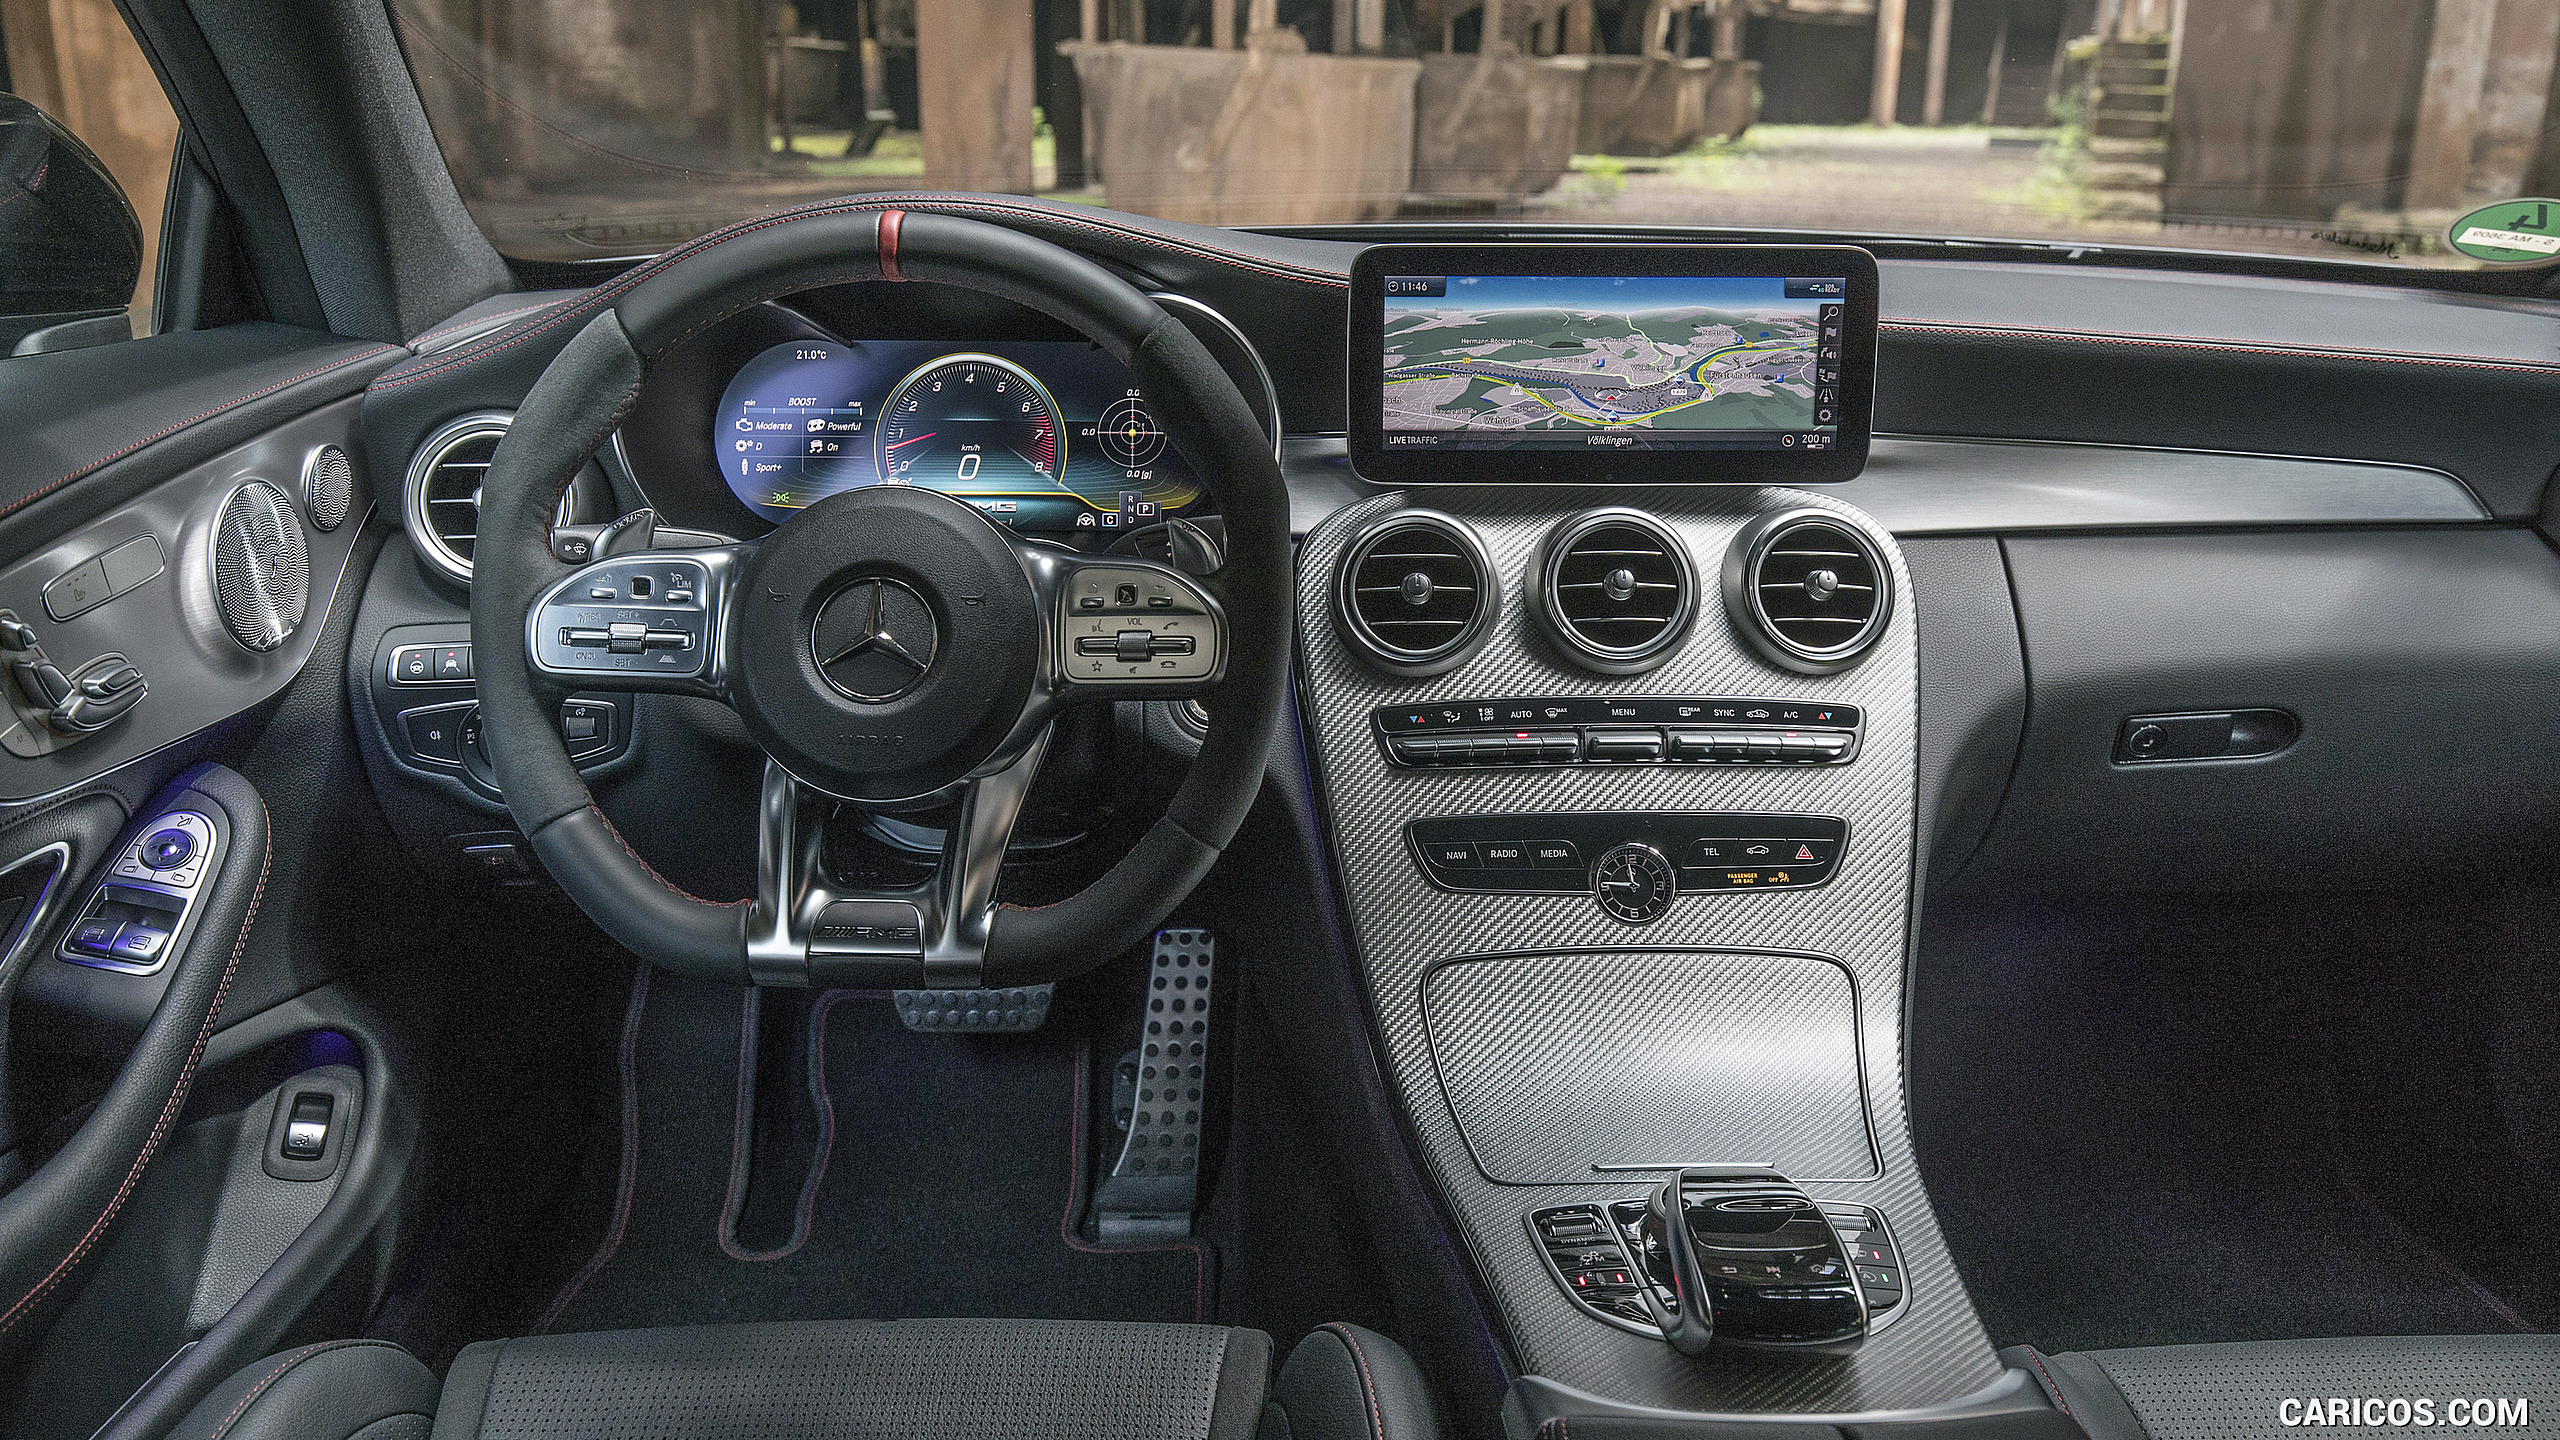 2019 Mercedes-AMG C43 4MATIC Coupe - Interior, Cockpit, #89 of 184